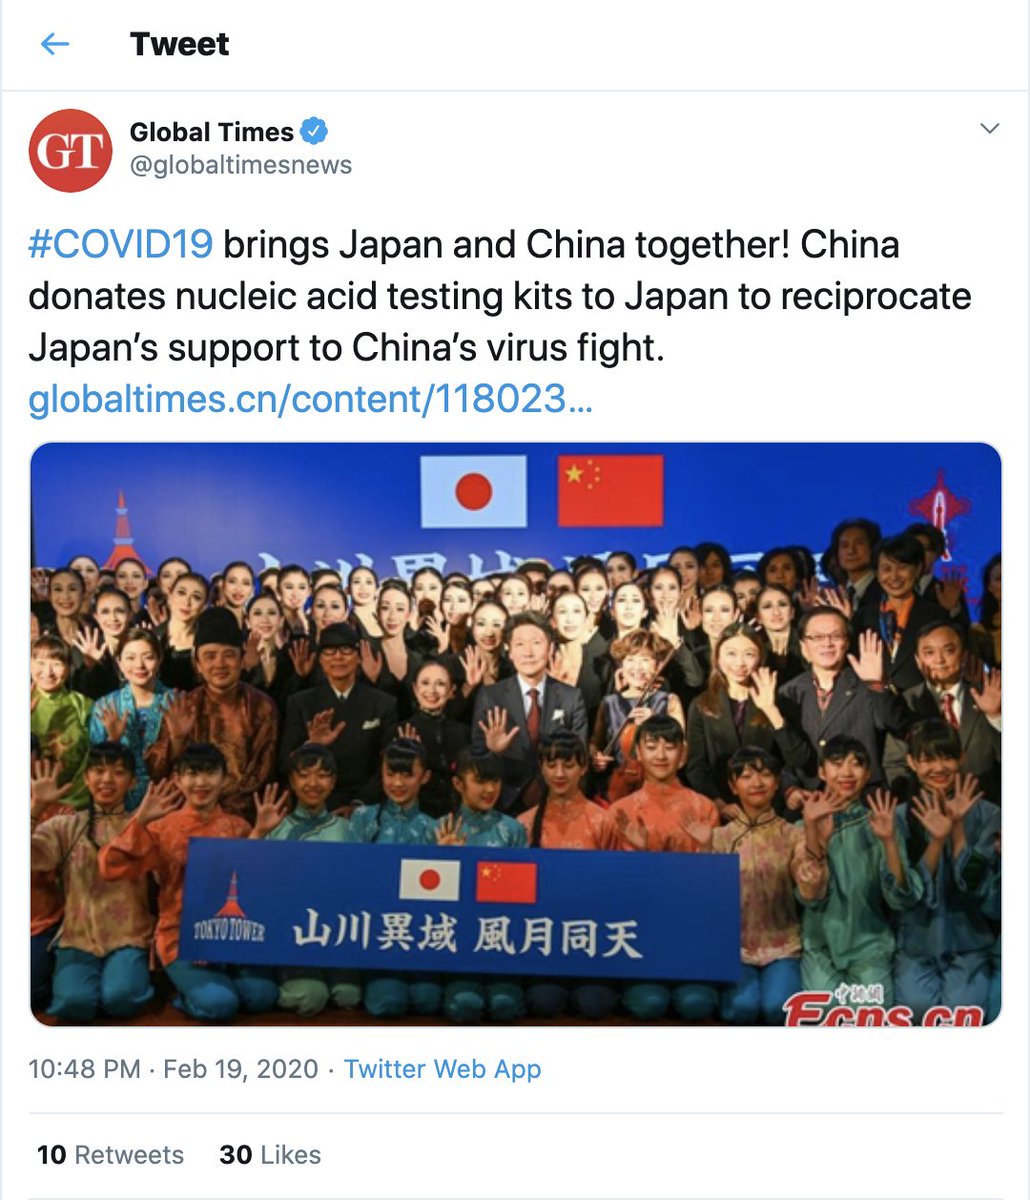 Japan stands out for receiving relatively more coverage about its donations to China. Lots of tweets mention Japan’s “goodwill” and how Chinese donations to Japan “reciprocate” their previous support. This reflects reports about how COVID has brought China and Japan closer. (3/)